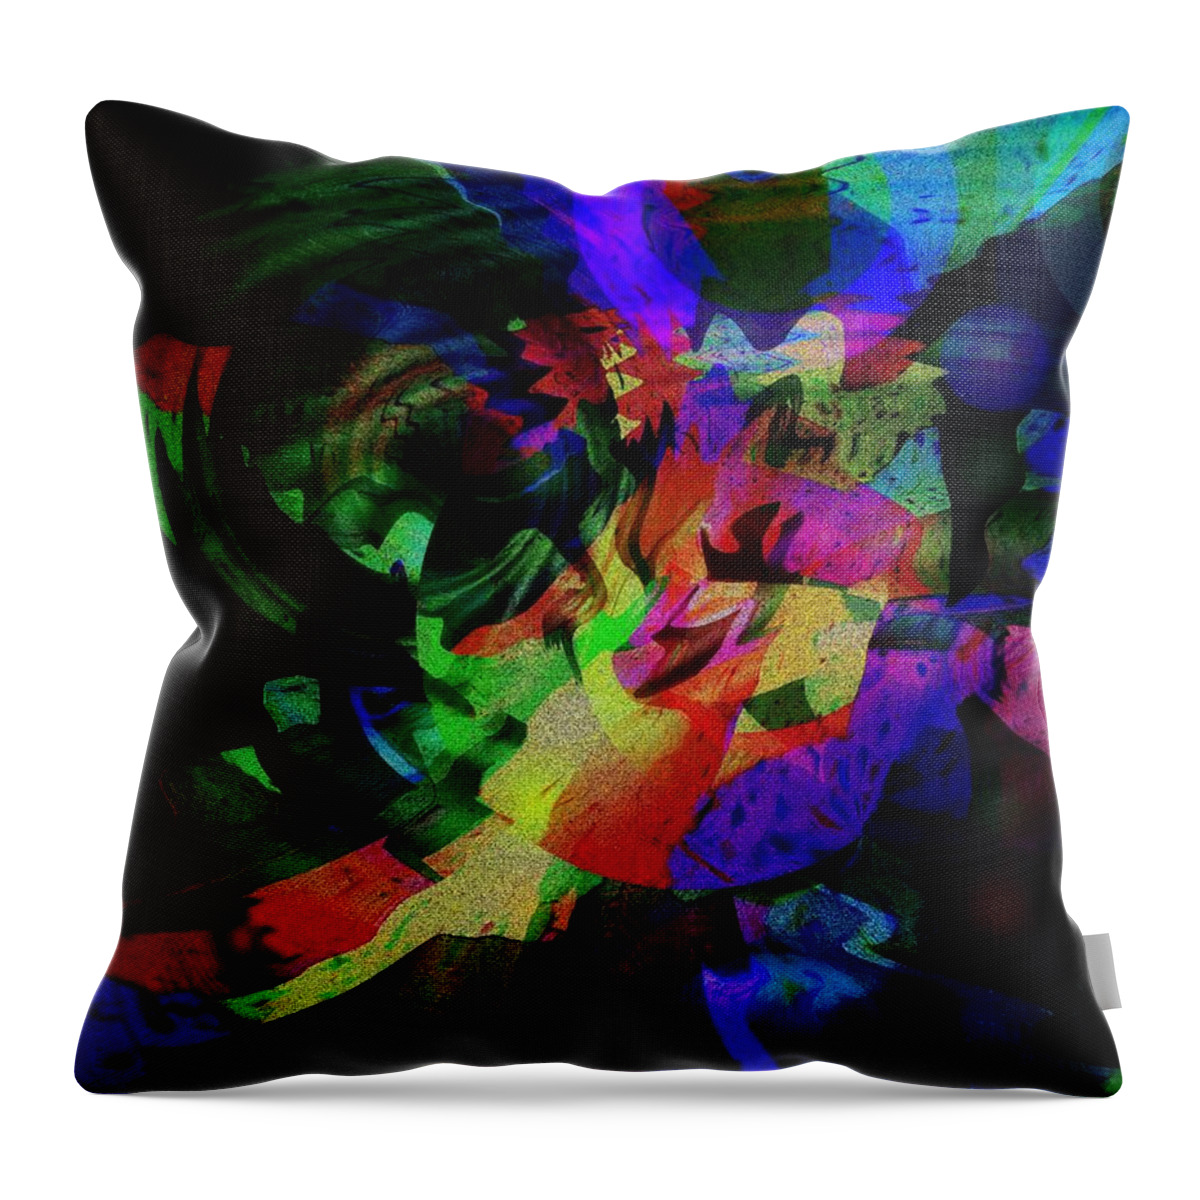 Sunset Throw Pillow featuring the digital art After Sunset by Mimulux Patricia No